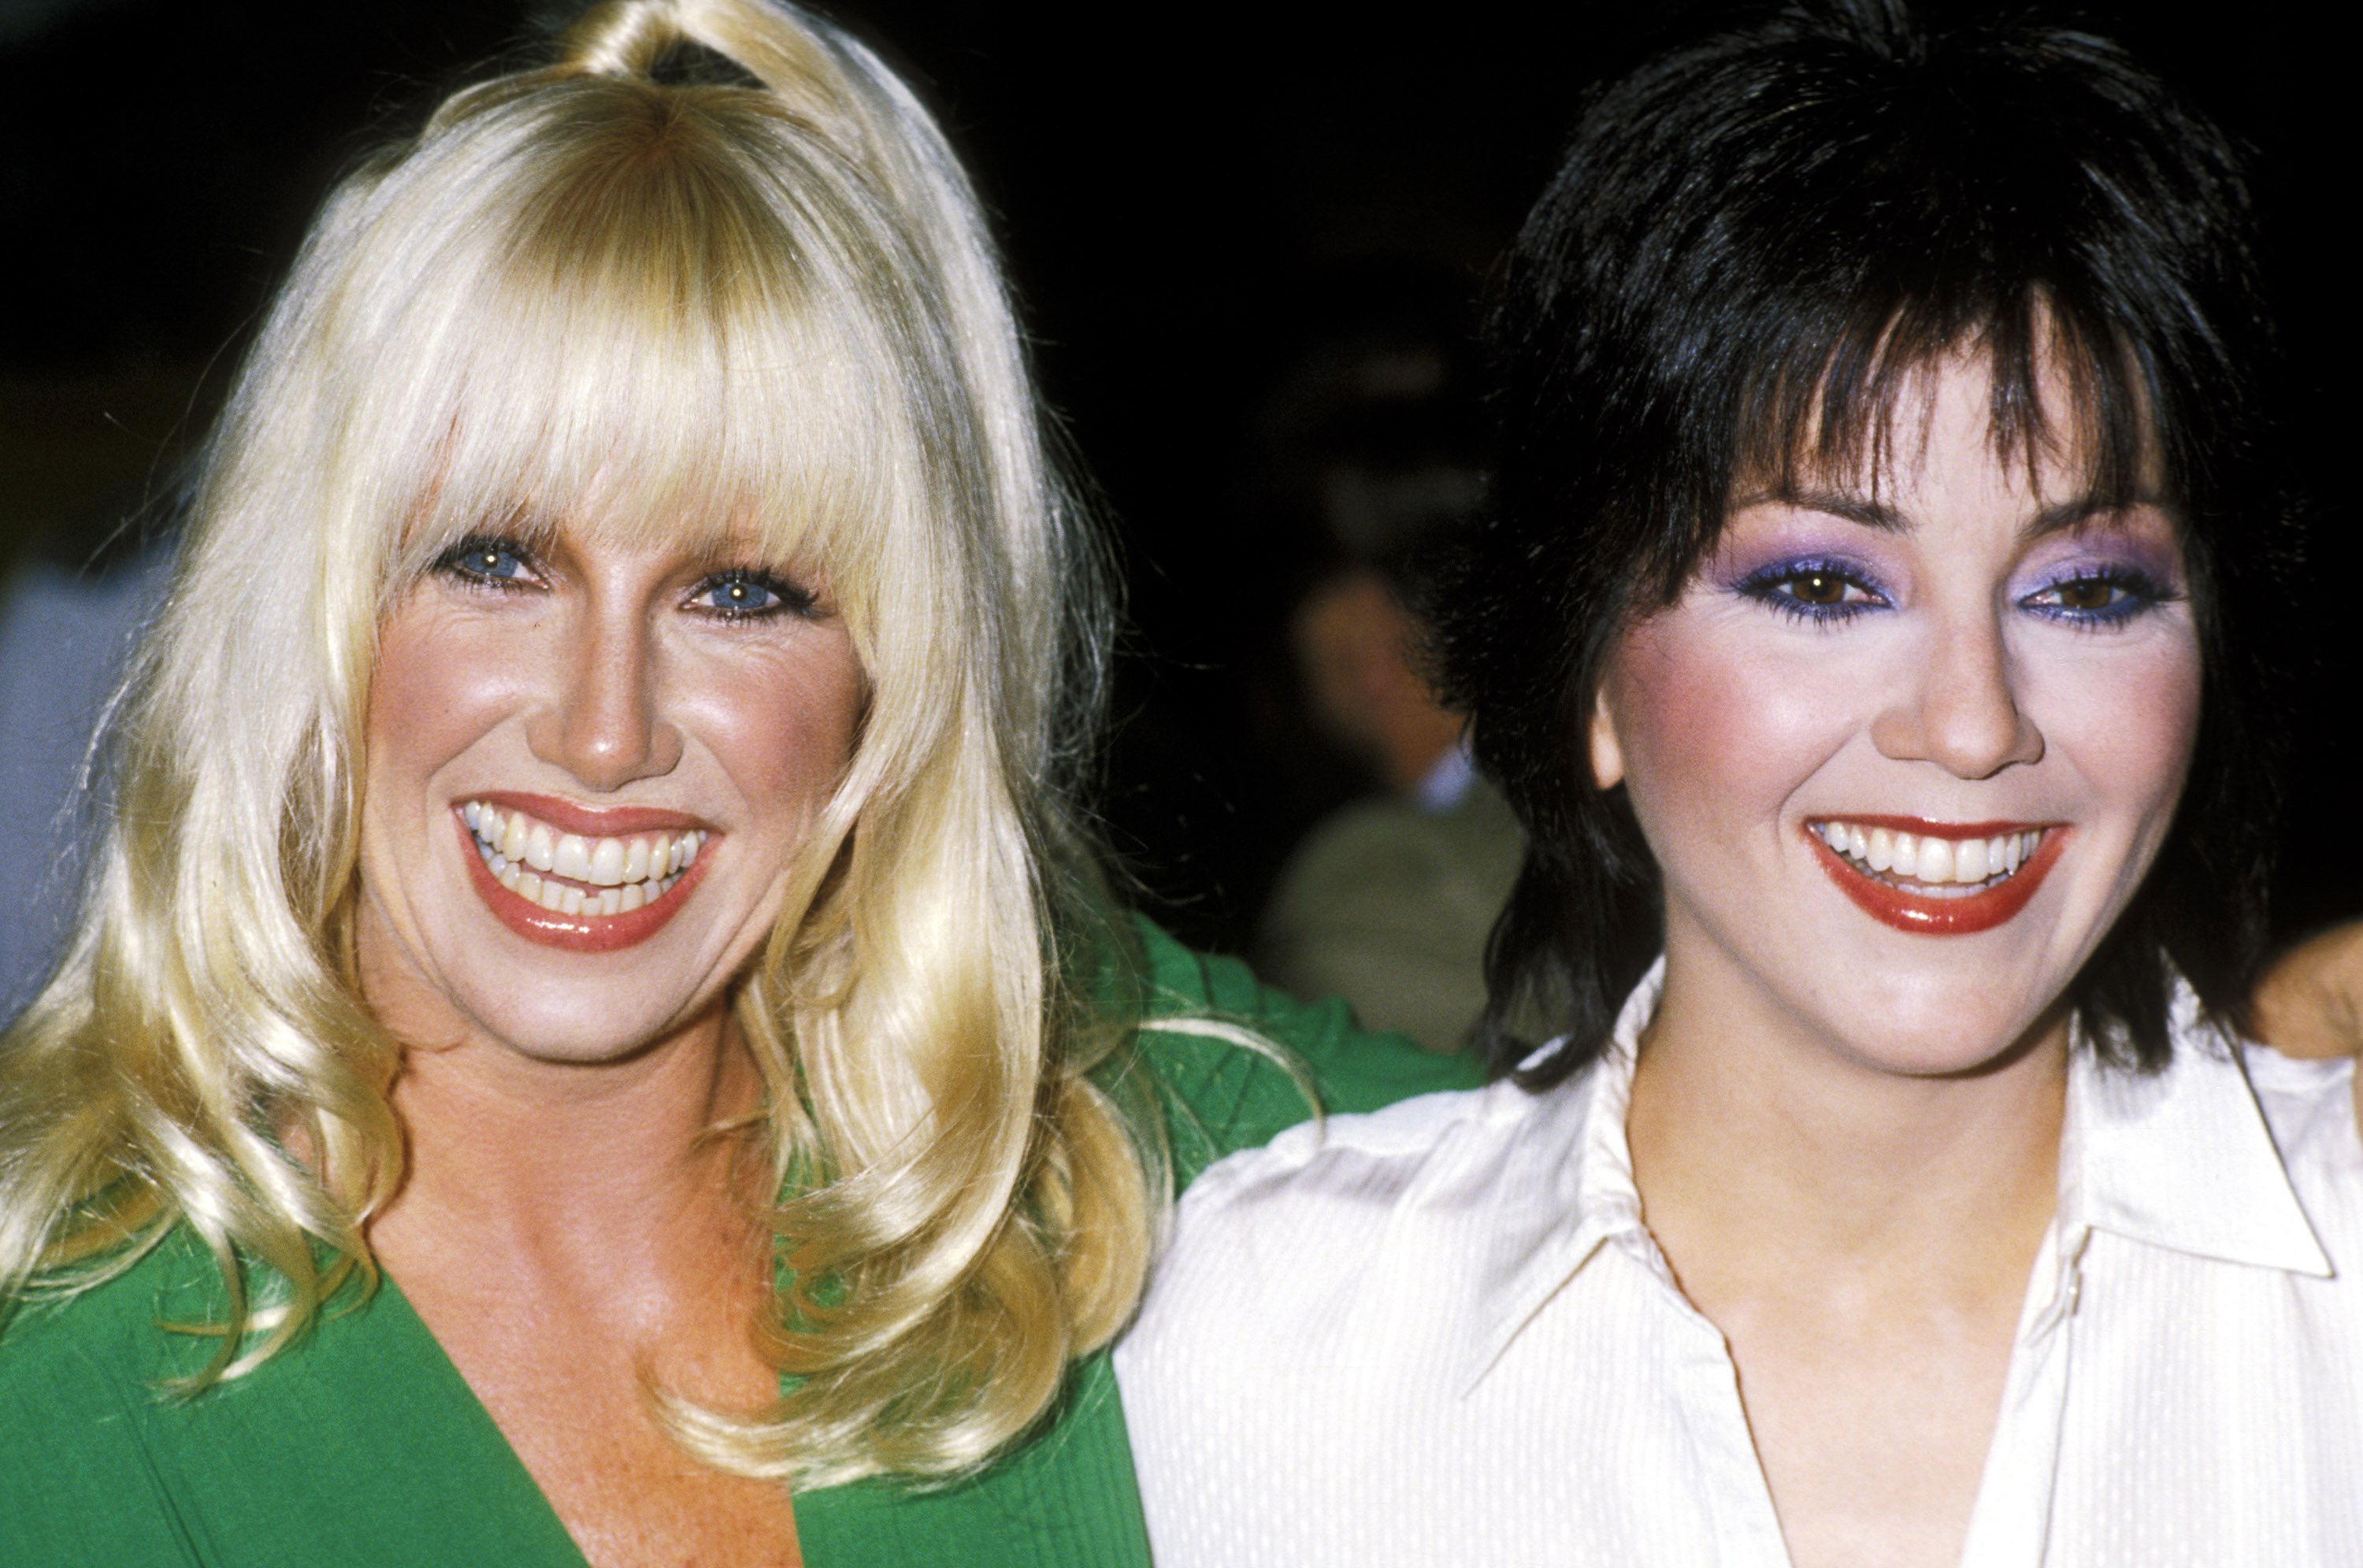 Suzanne Somers and Joyce DeWitt during a press preview and luncheon For "Three's Company" and "The Ropers" on September 5, 1979, at Beverly Hilton Hotel in Beverly Hills, California | Source: Getty Images